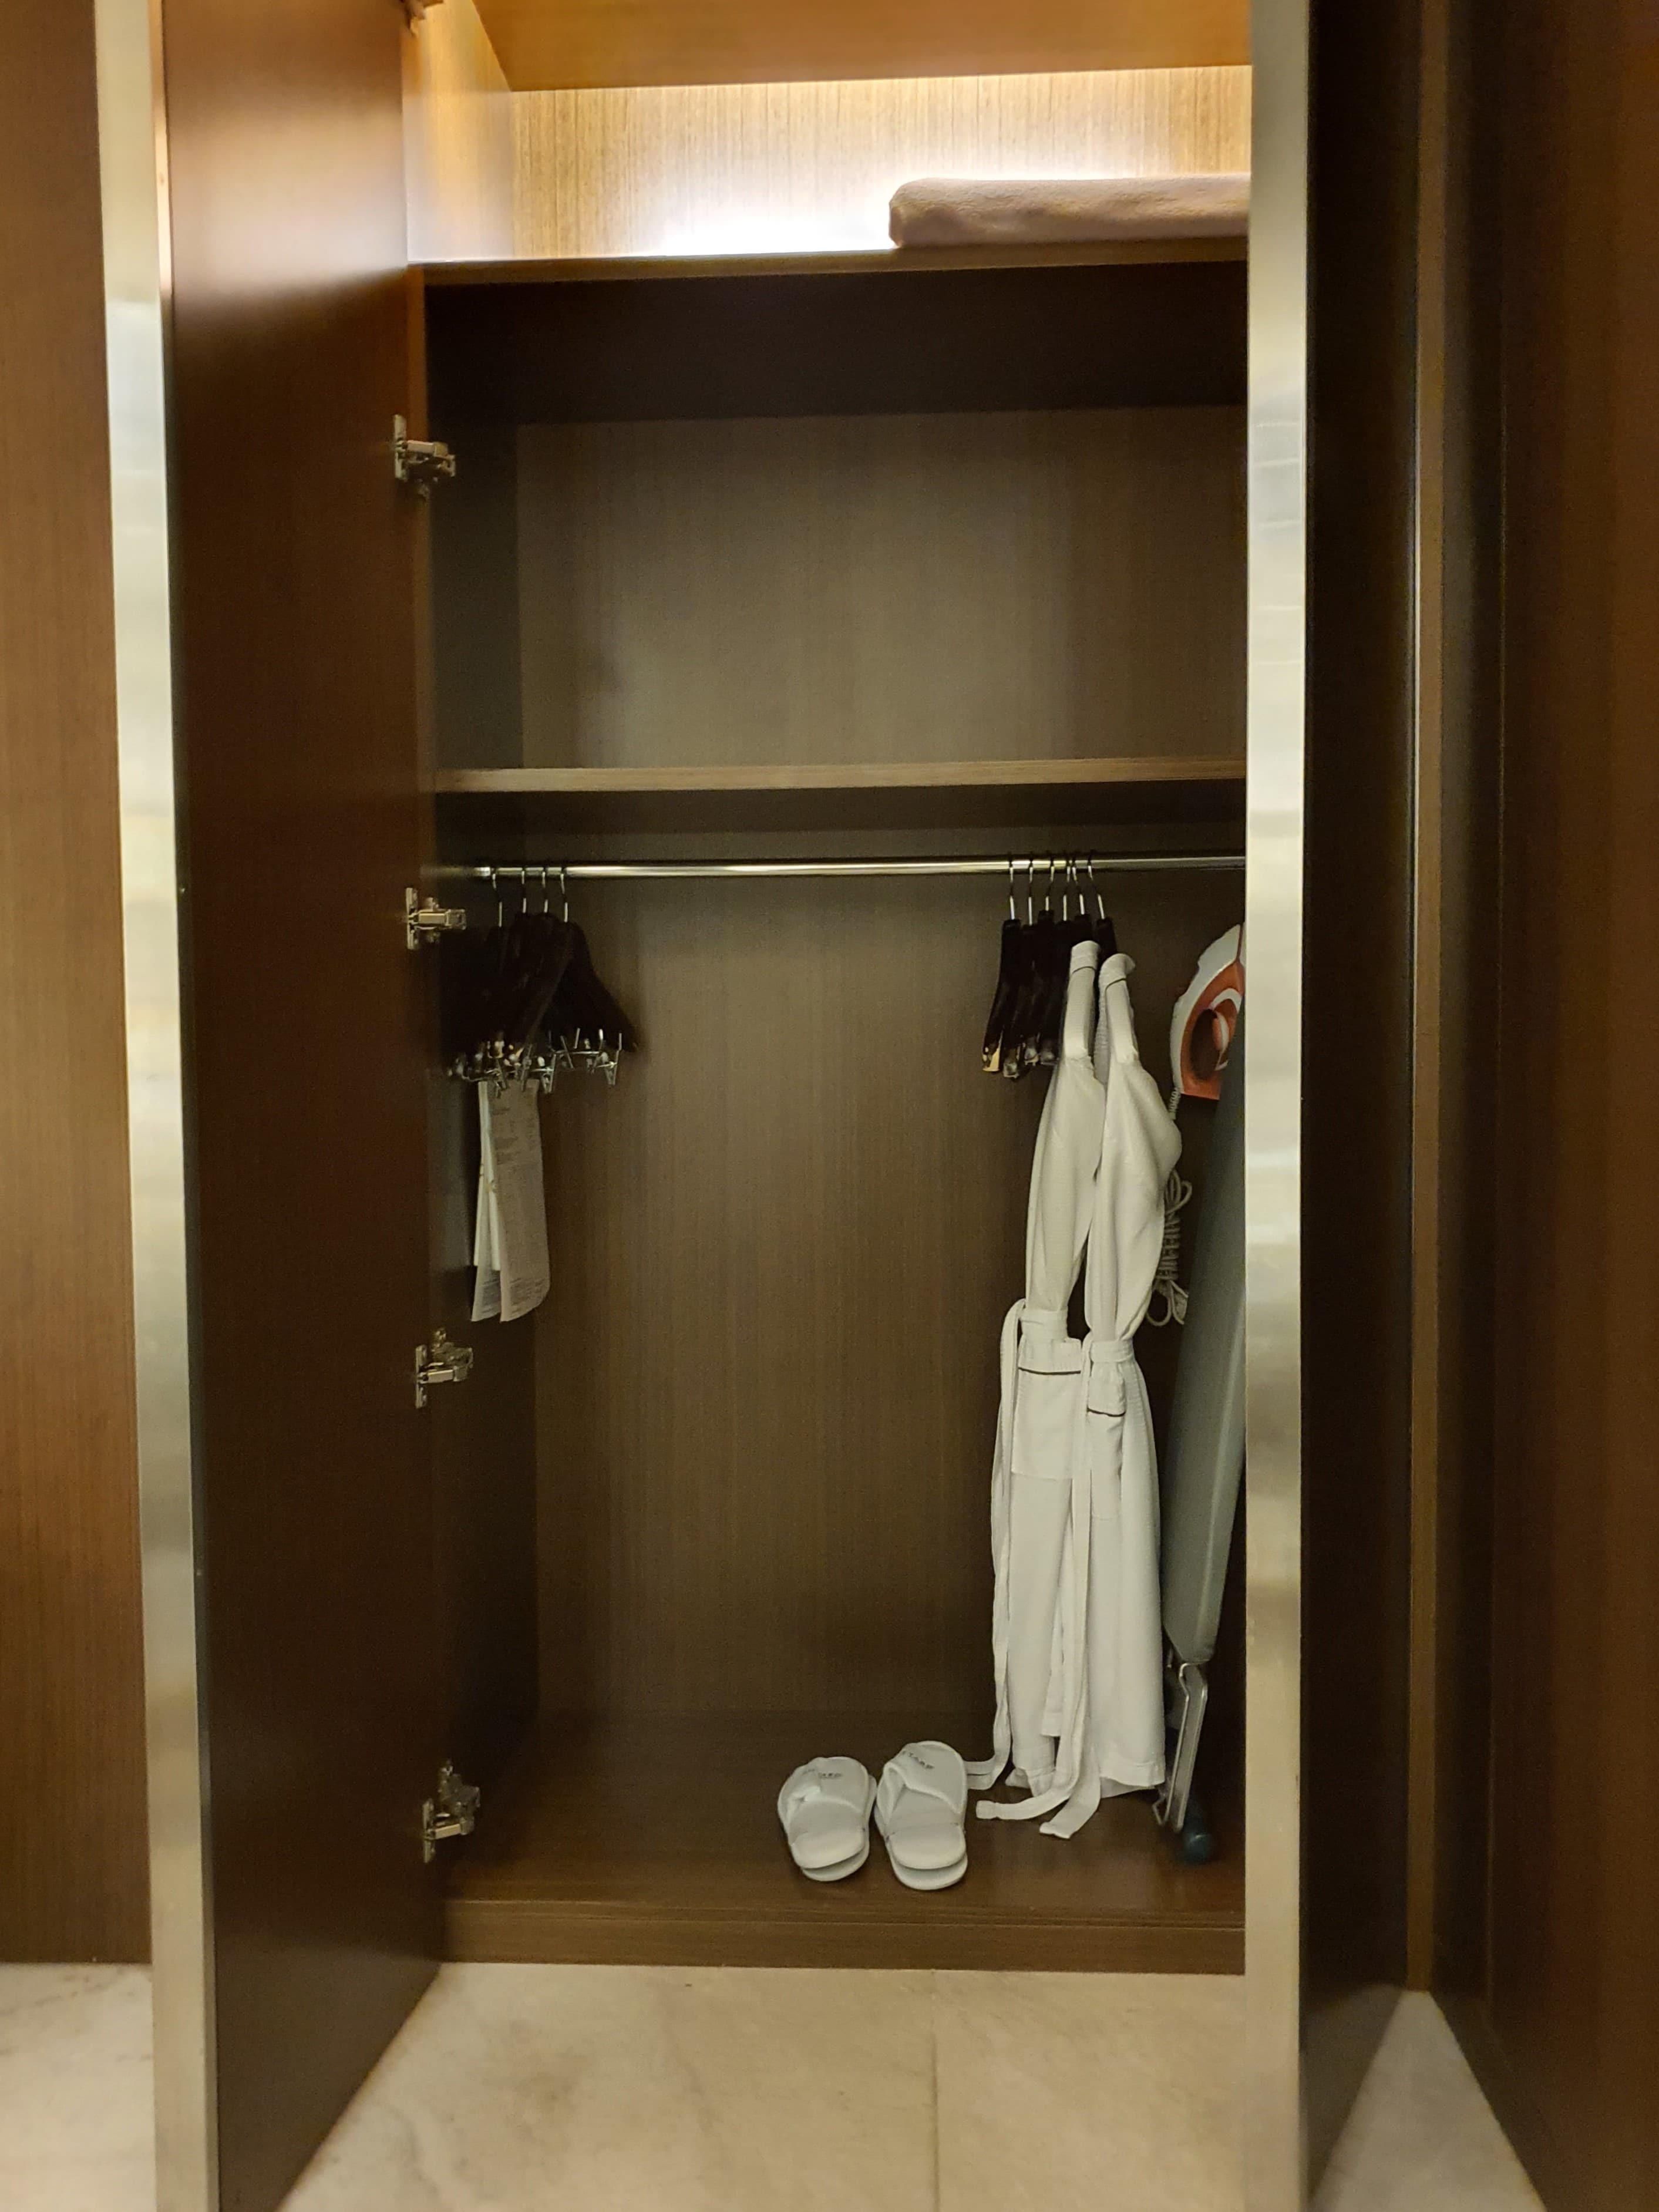 Accessible guestroom0 : Built-in wardrobe in a hotel room with both doors open